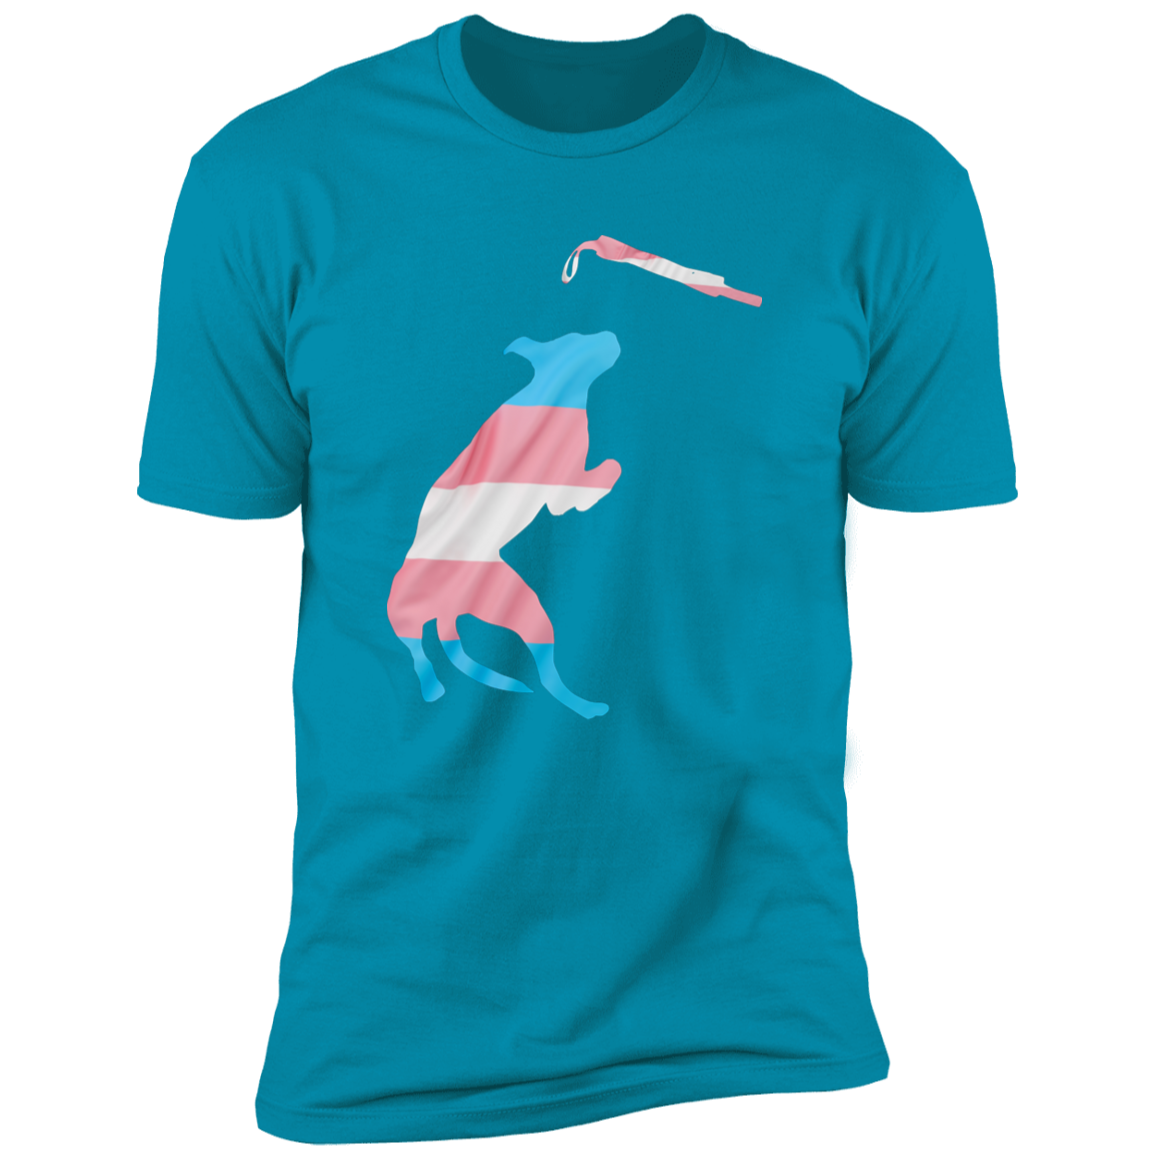 Trans Pride Dock Diving Pride T-shirt, Trans Pride Docking Diving Dog Shirt for humans, in turquoise 